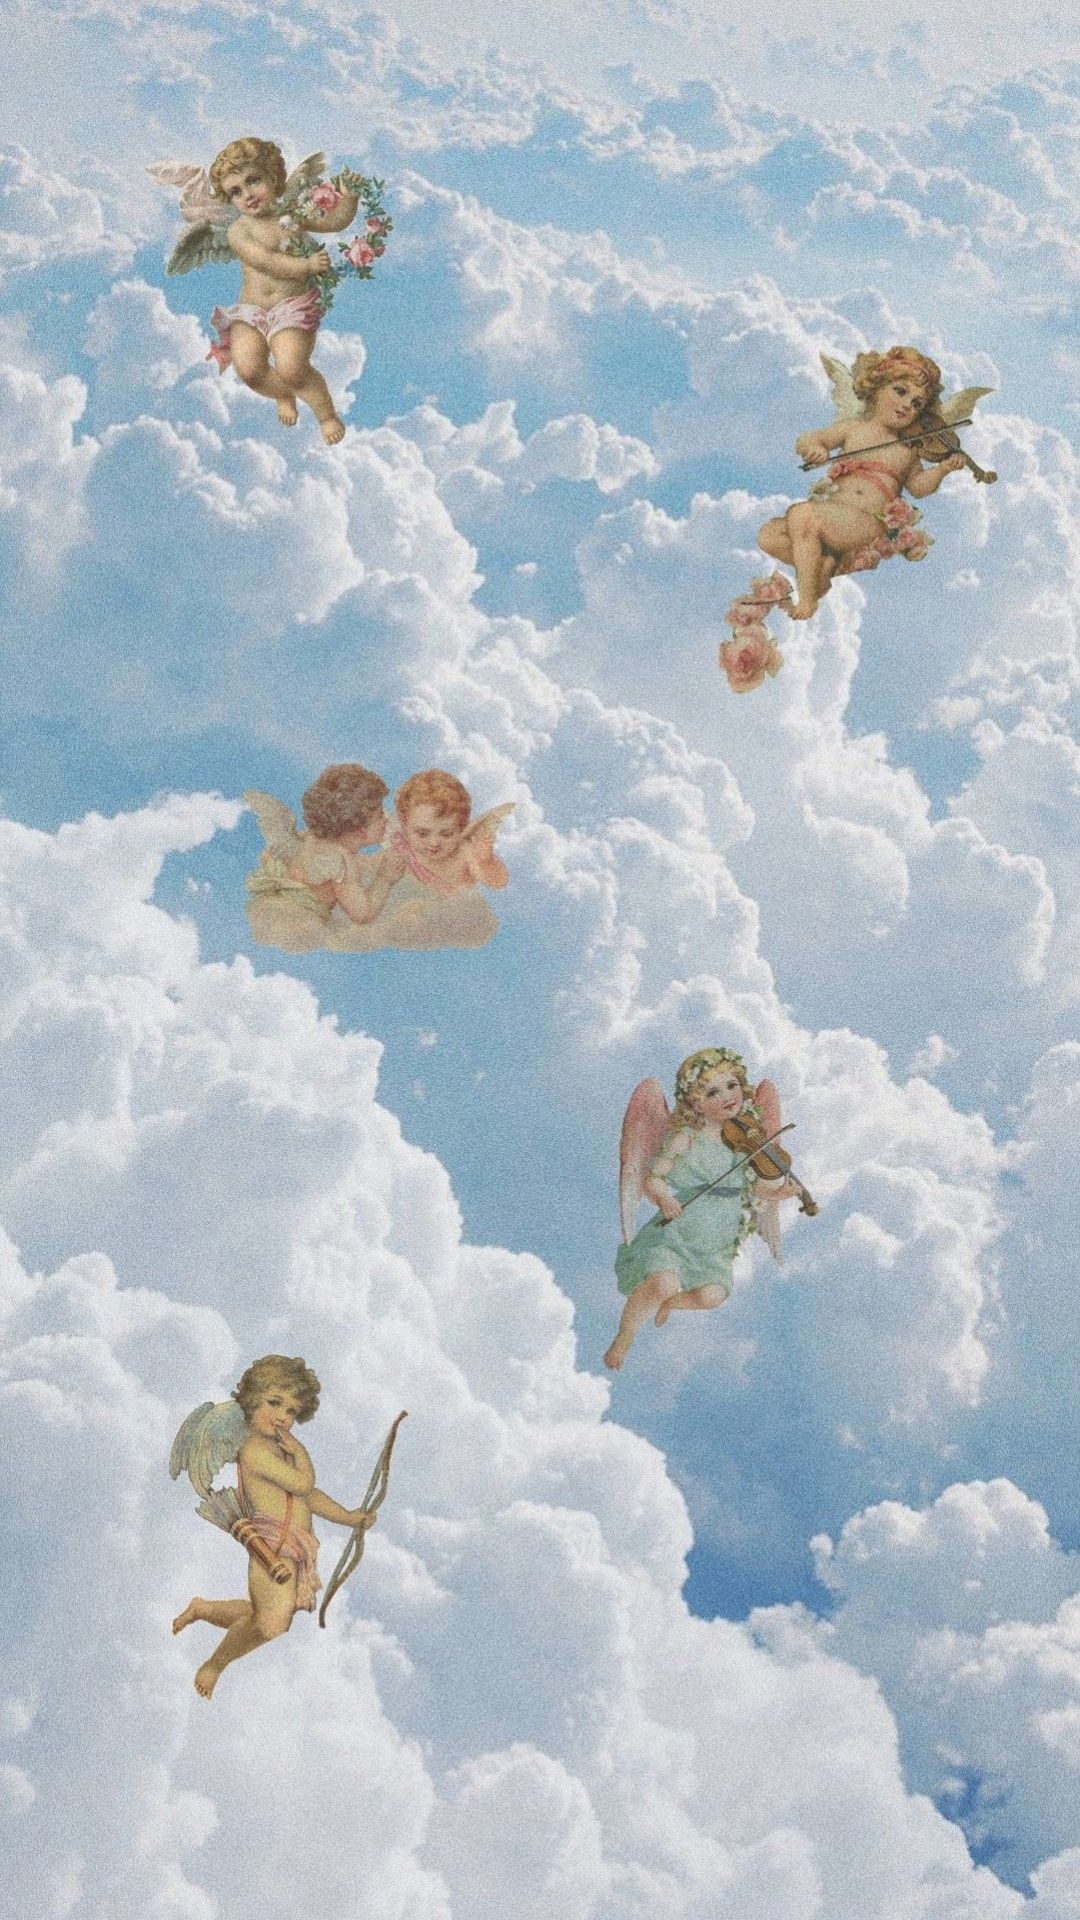 Angel Aesthetic Clouds Wallpaper Free Angel Aesthetic Clouds Background